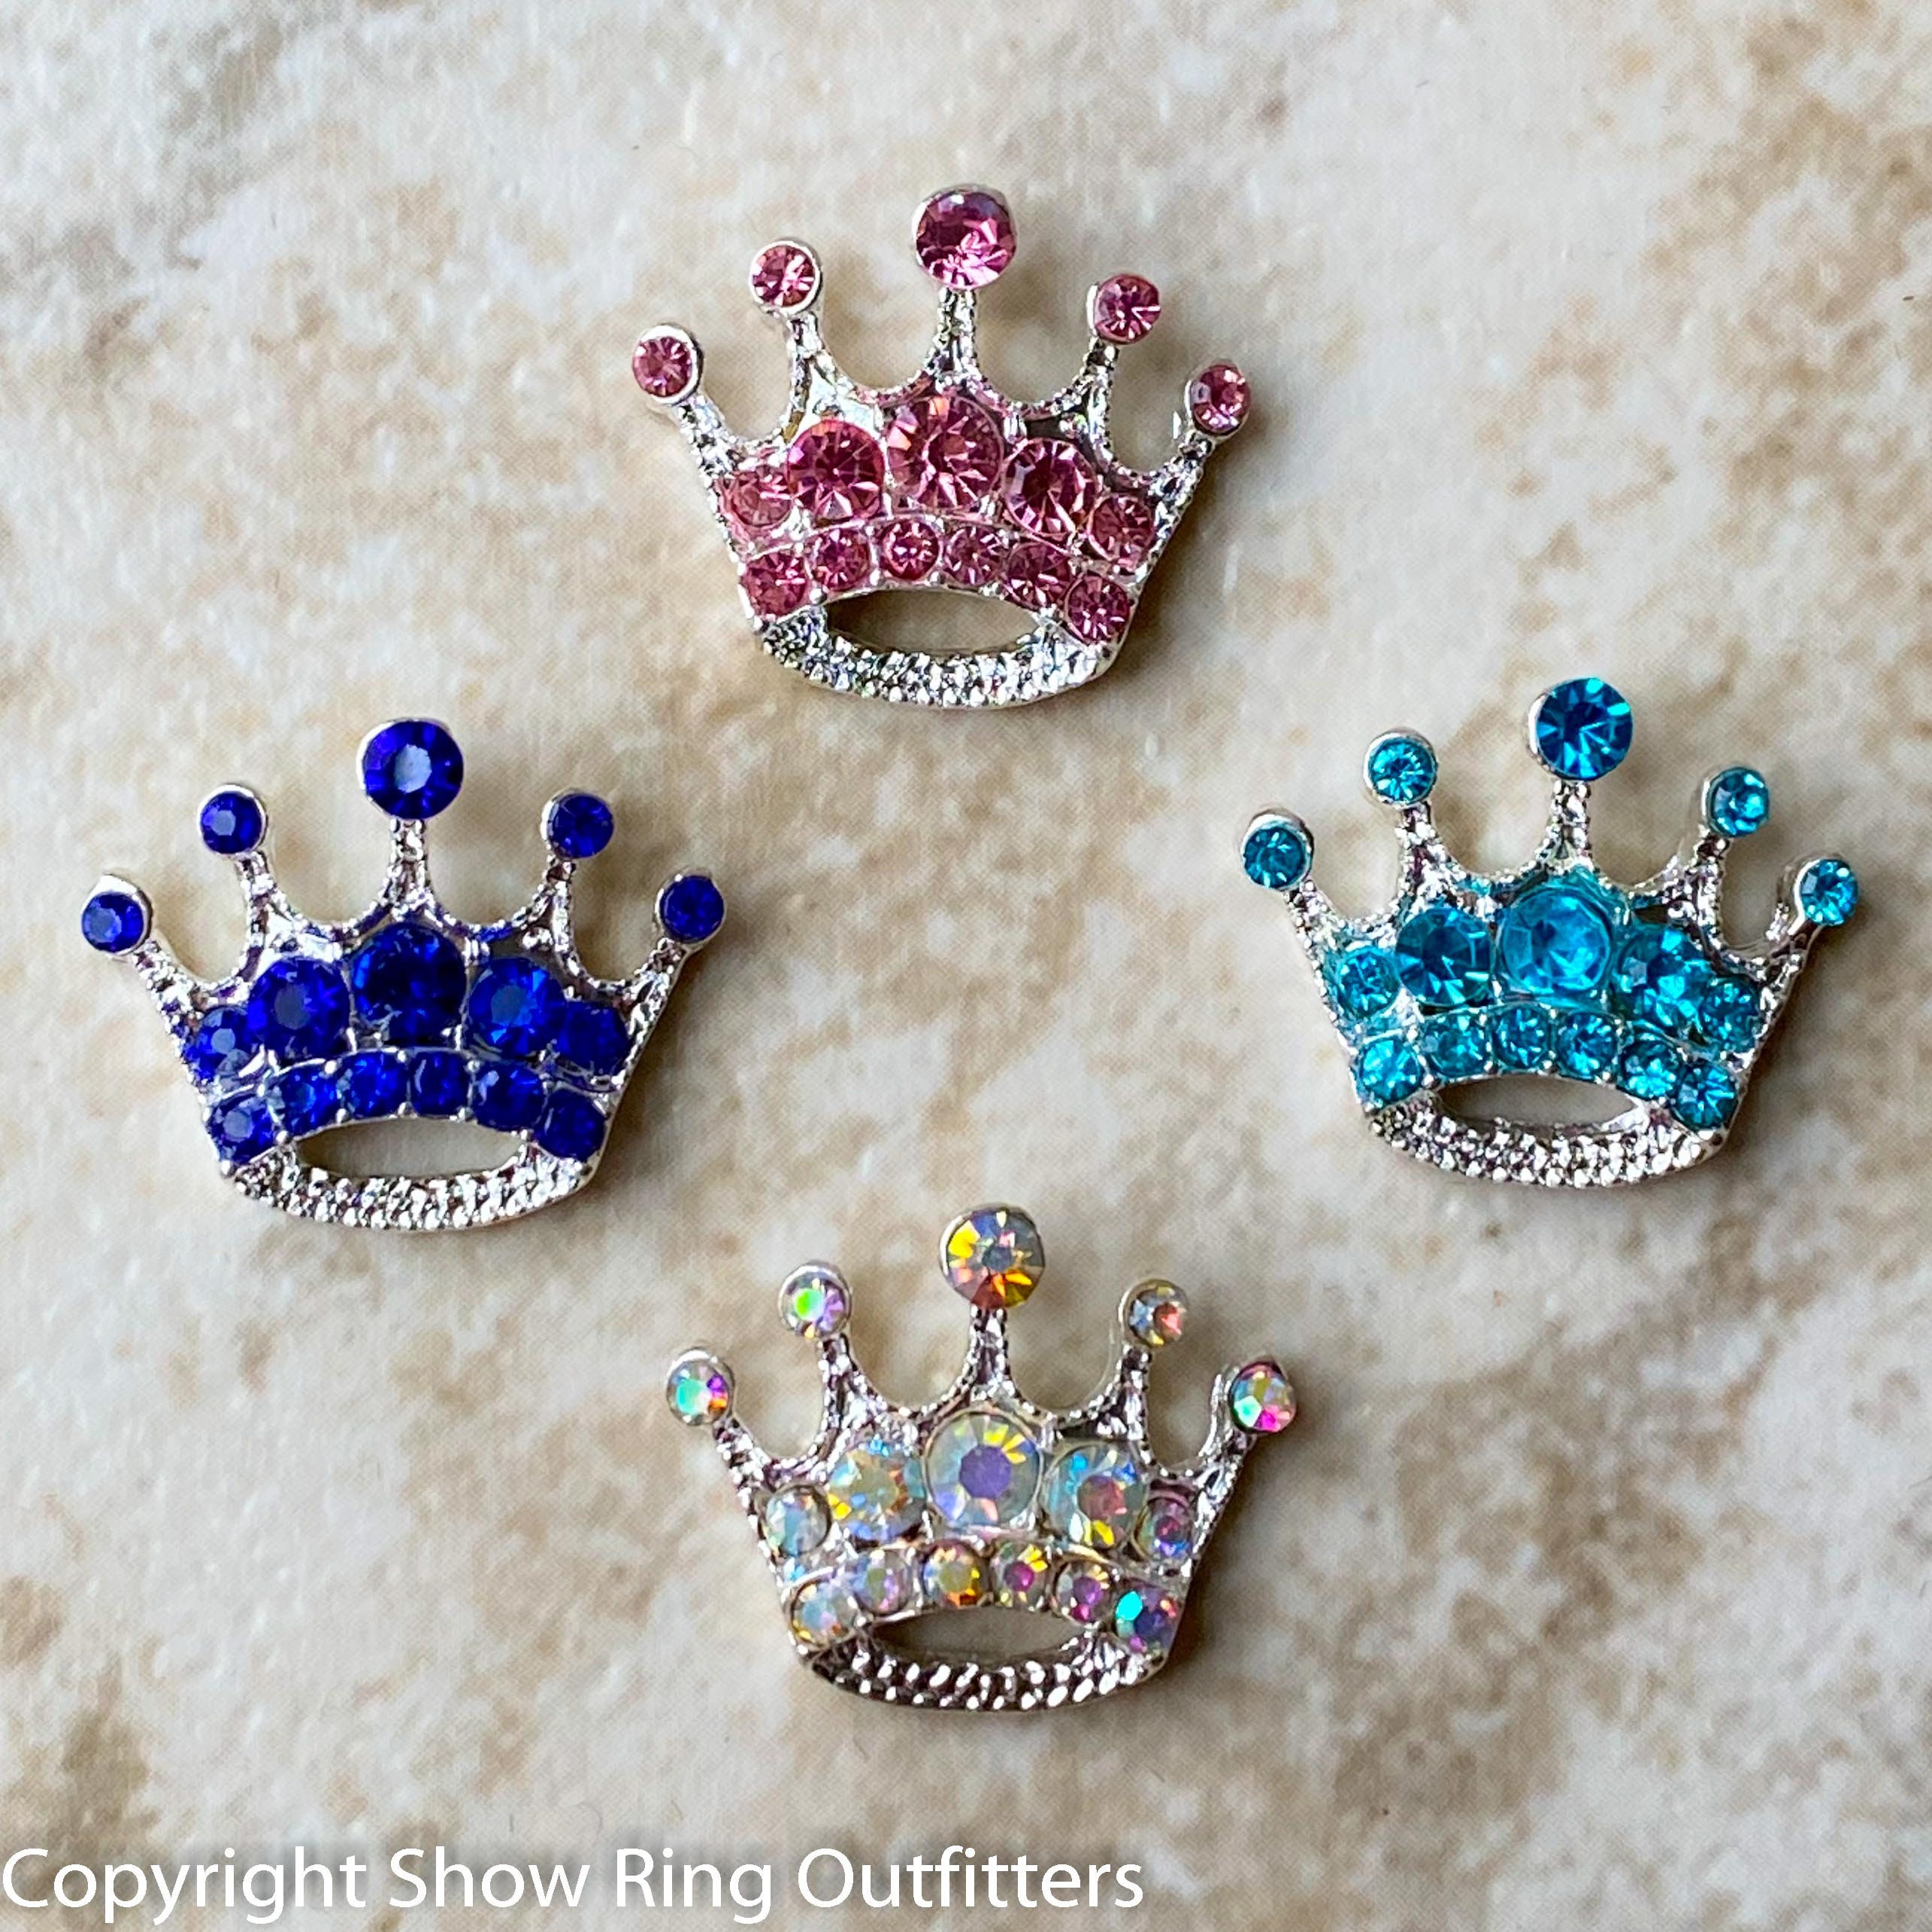 The Royal Crown Box – The Traveling Miss